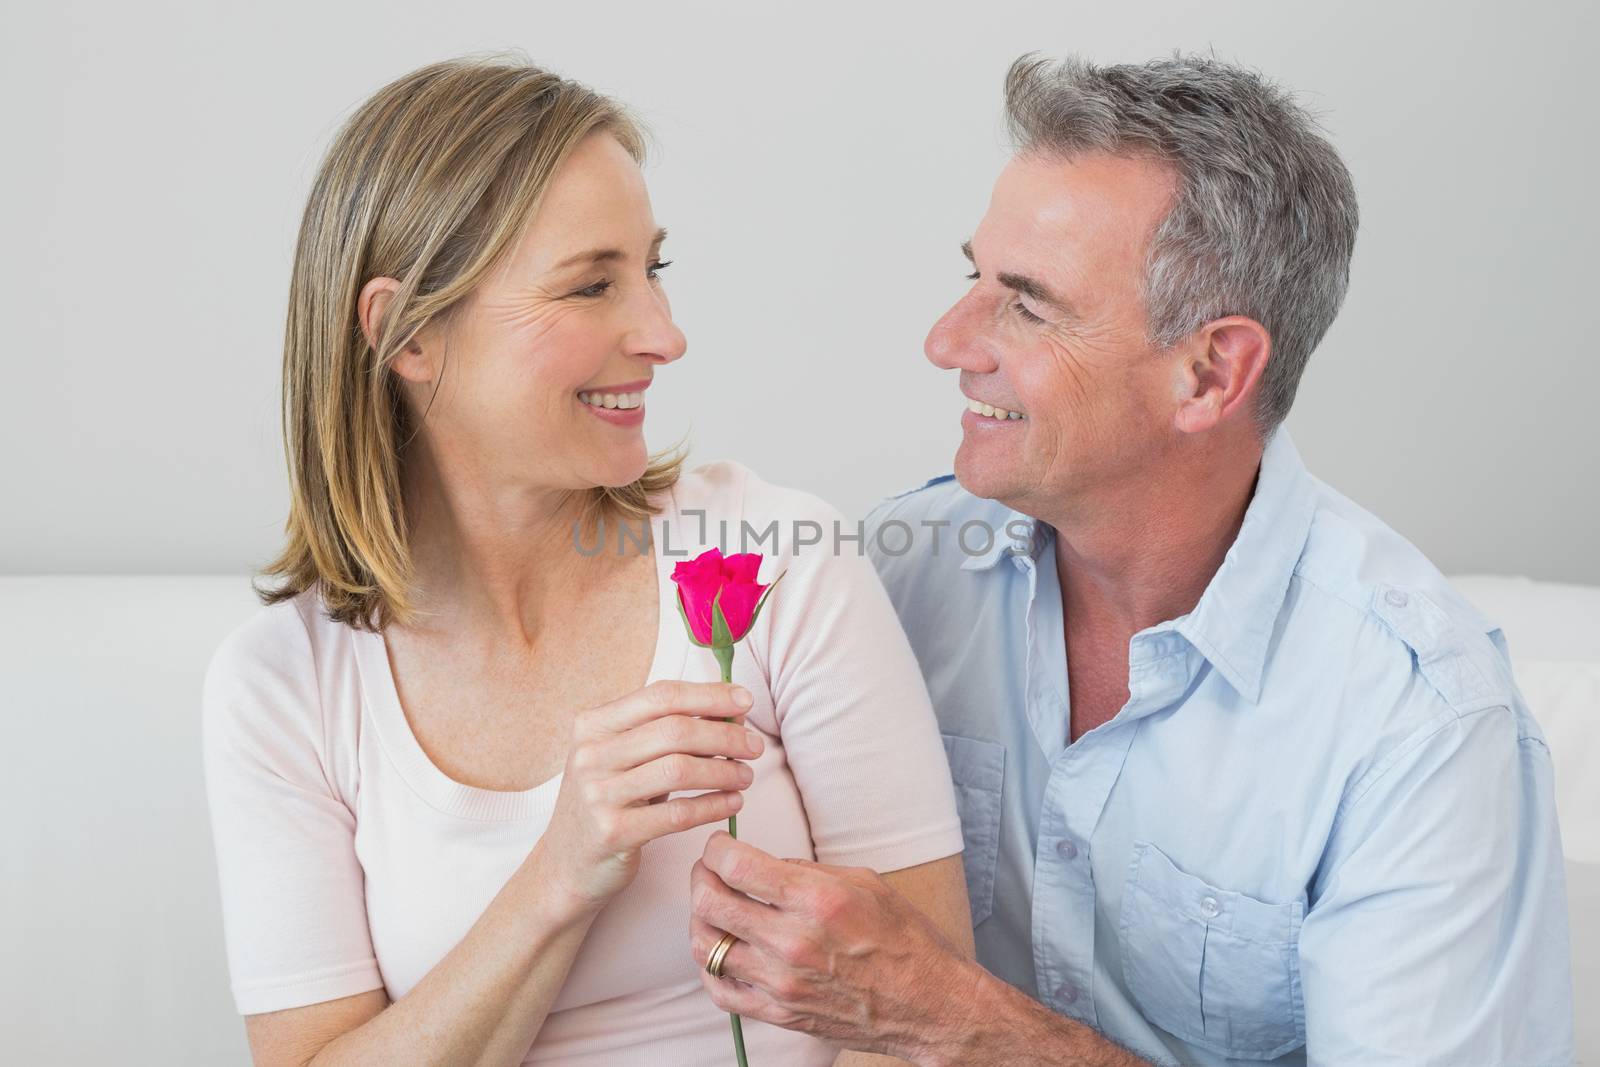 Happy romantic couple with a flower by Wavebreakmedia